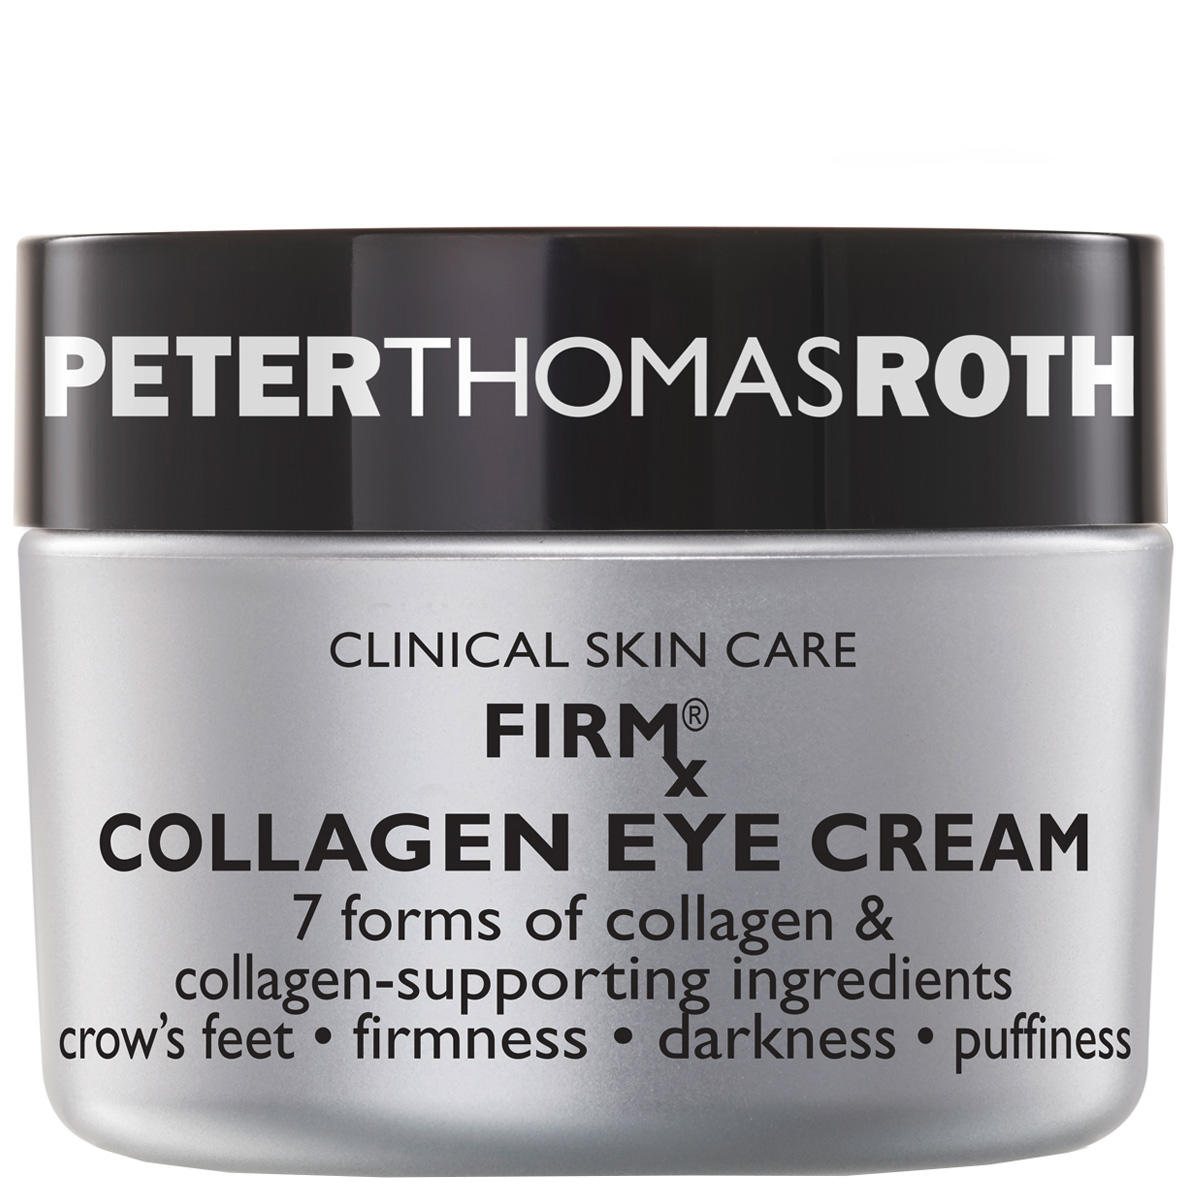 PETER THOMAS ROTH CLINICAL SKIN CARE FIRMx Collagen Eye Cream 15 ml - 1